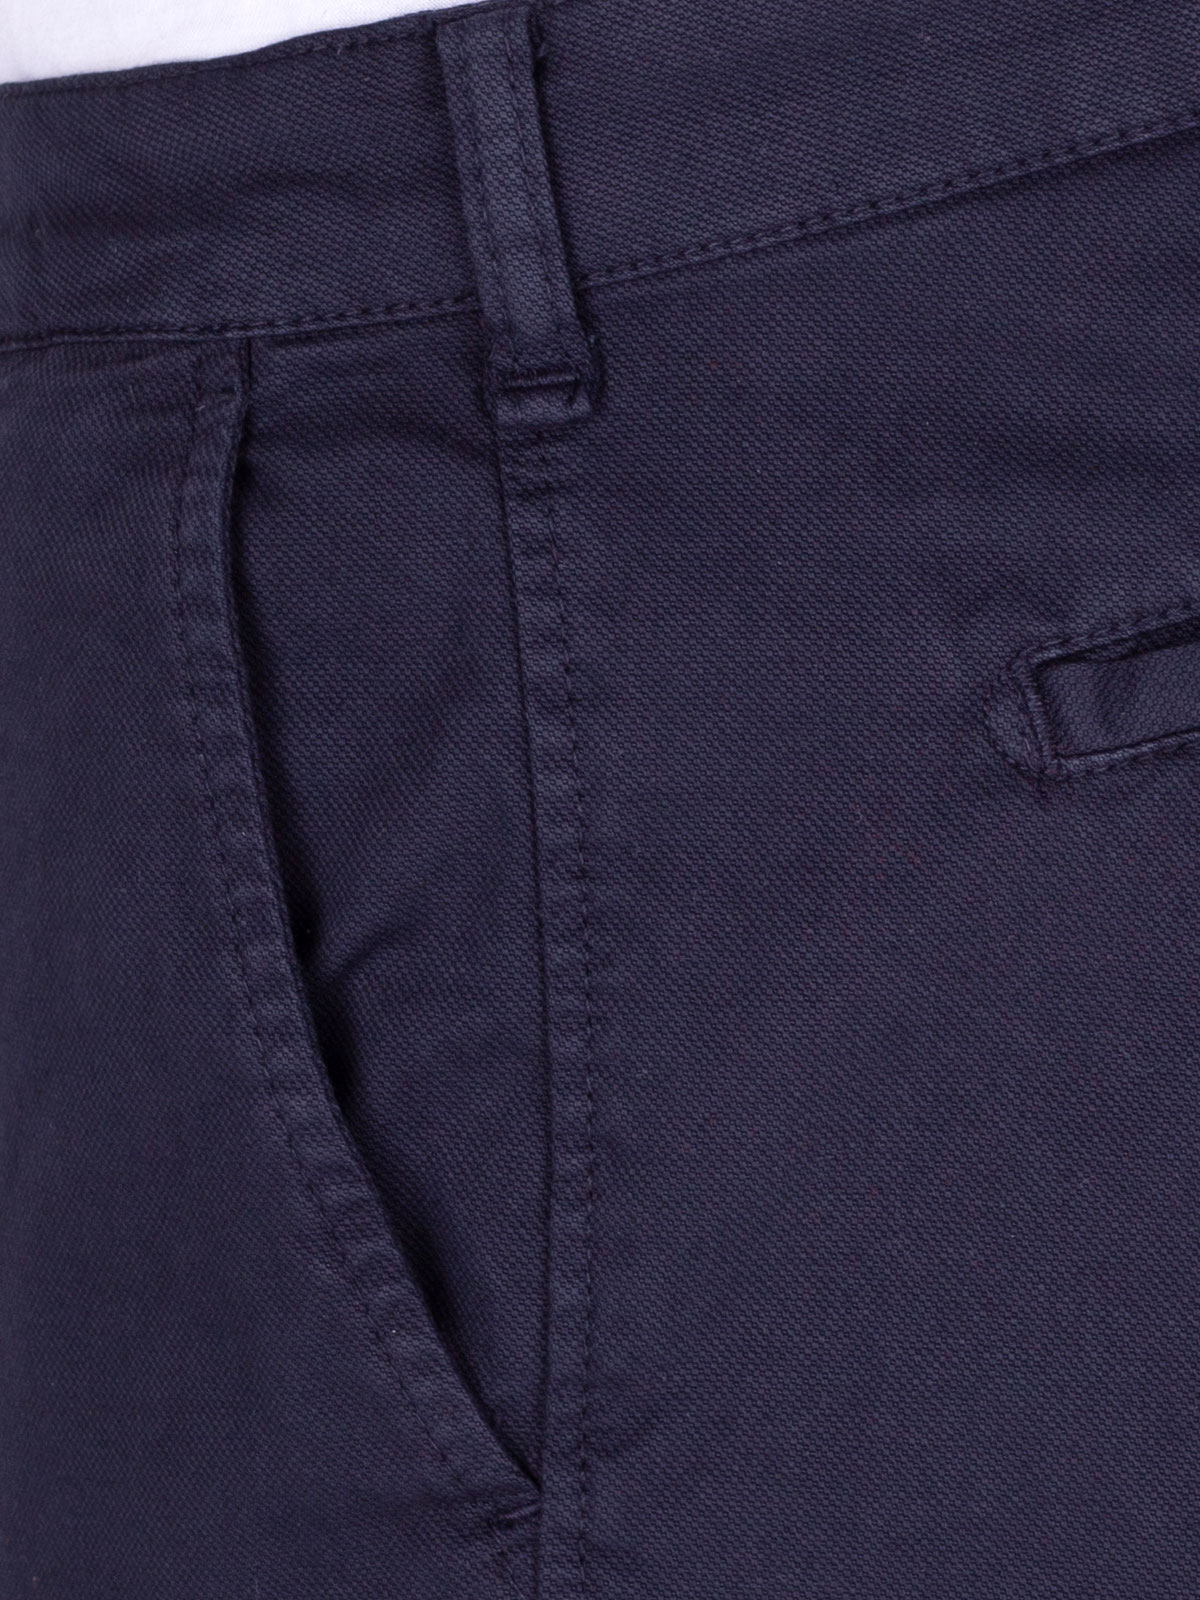 Structured trousers in dark blue - 60280 € 61.30 img2